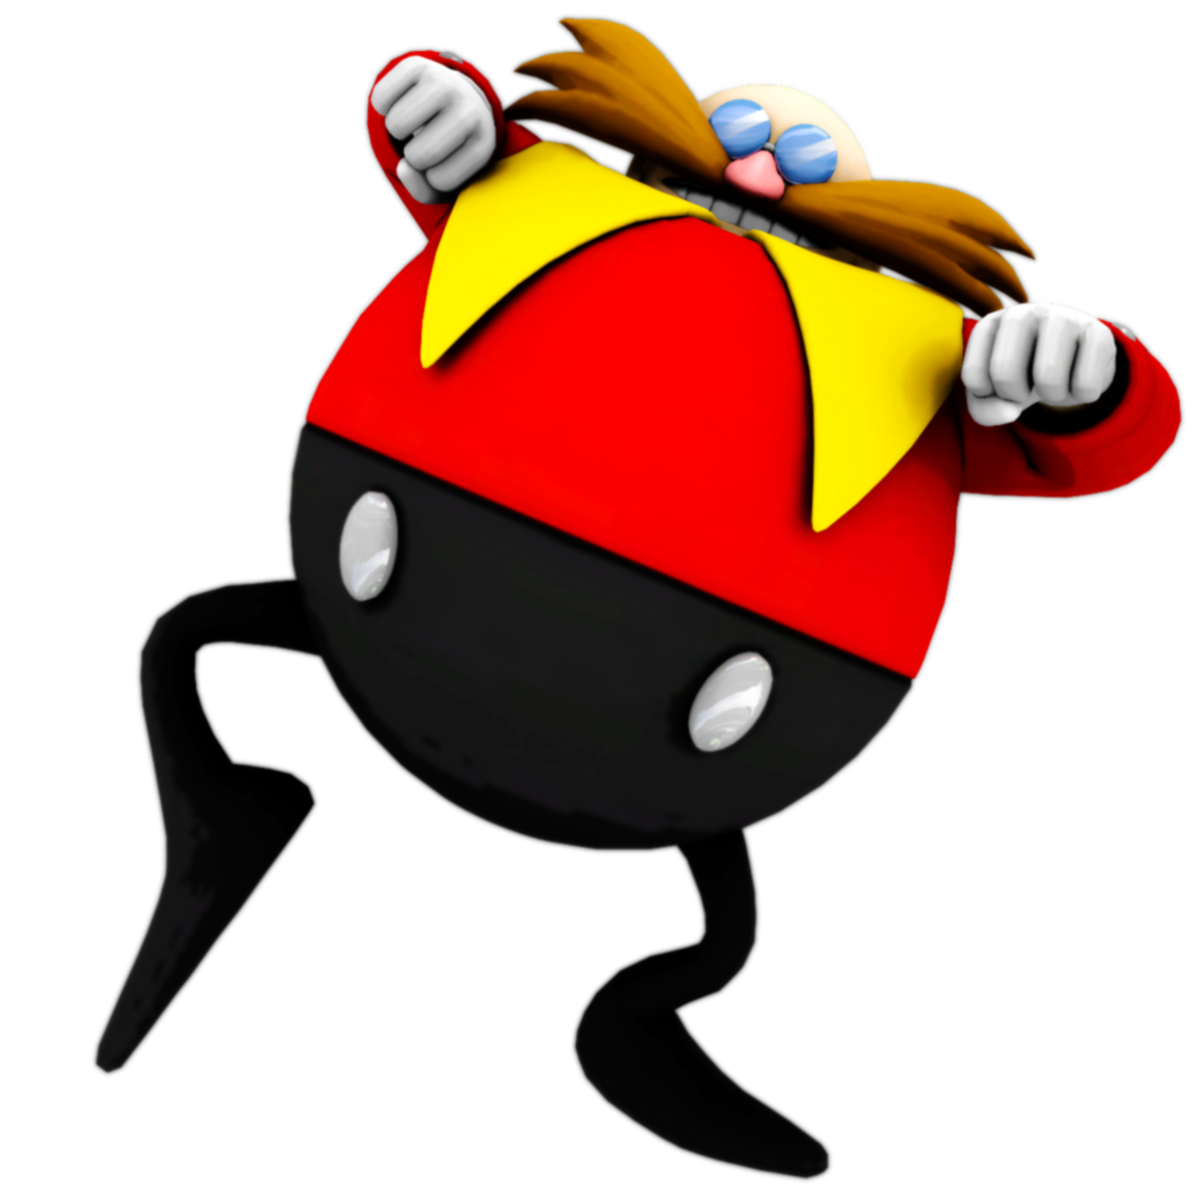 Dr Robotnik before the name and design change in Sonic Adventure